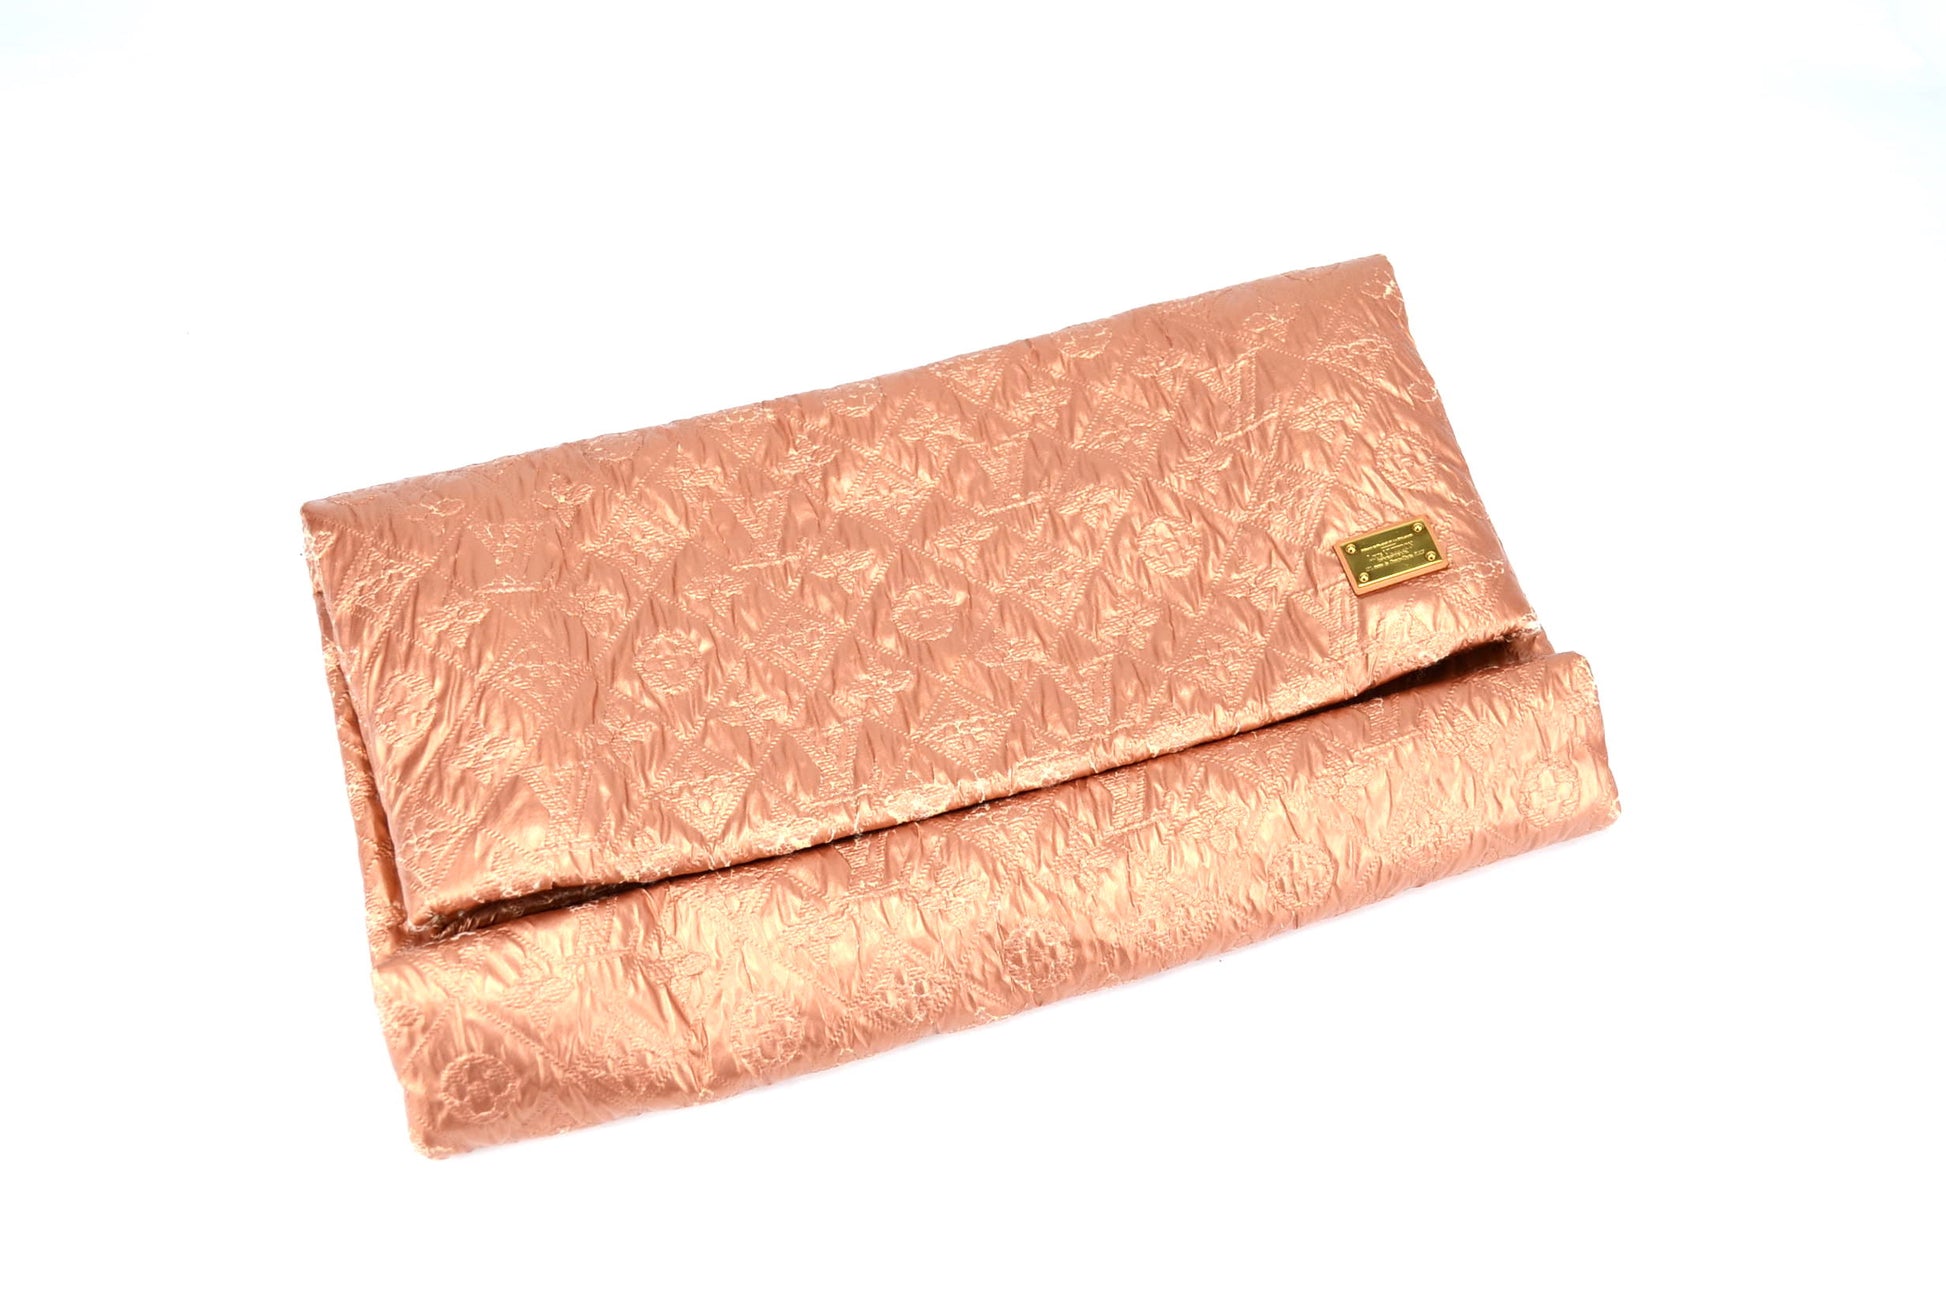 Louis Vuitton Limelight rosegold fold over Clutch – Luxe 4 Less